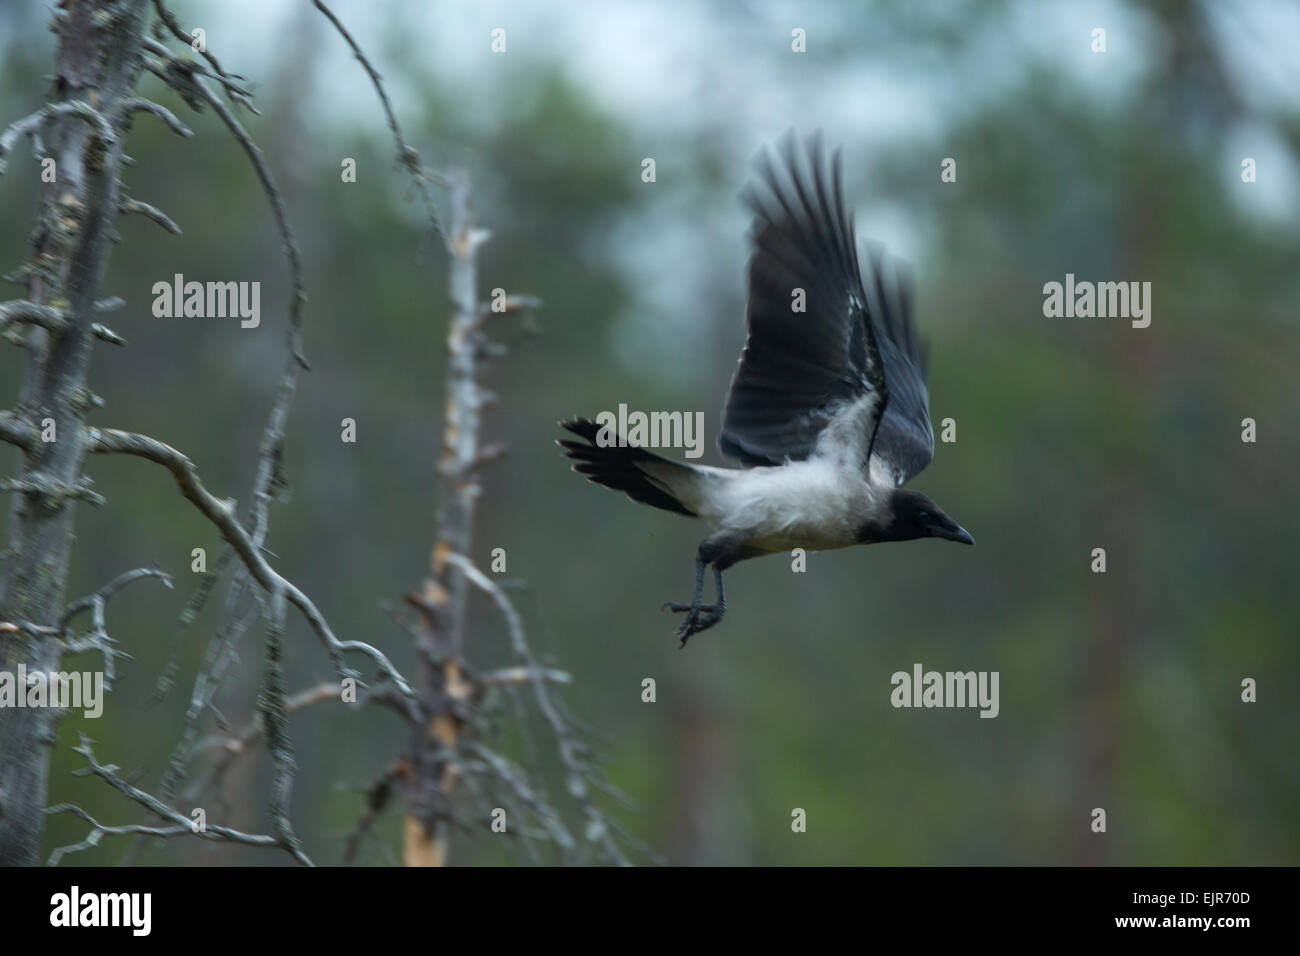 A Hooded Crow in flight Stock Photo